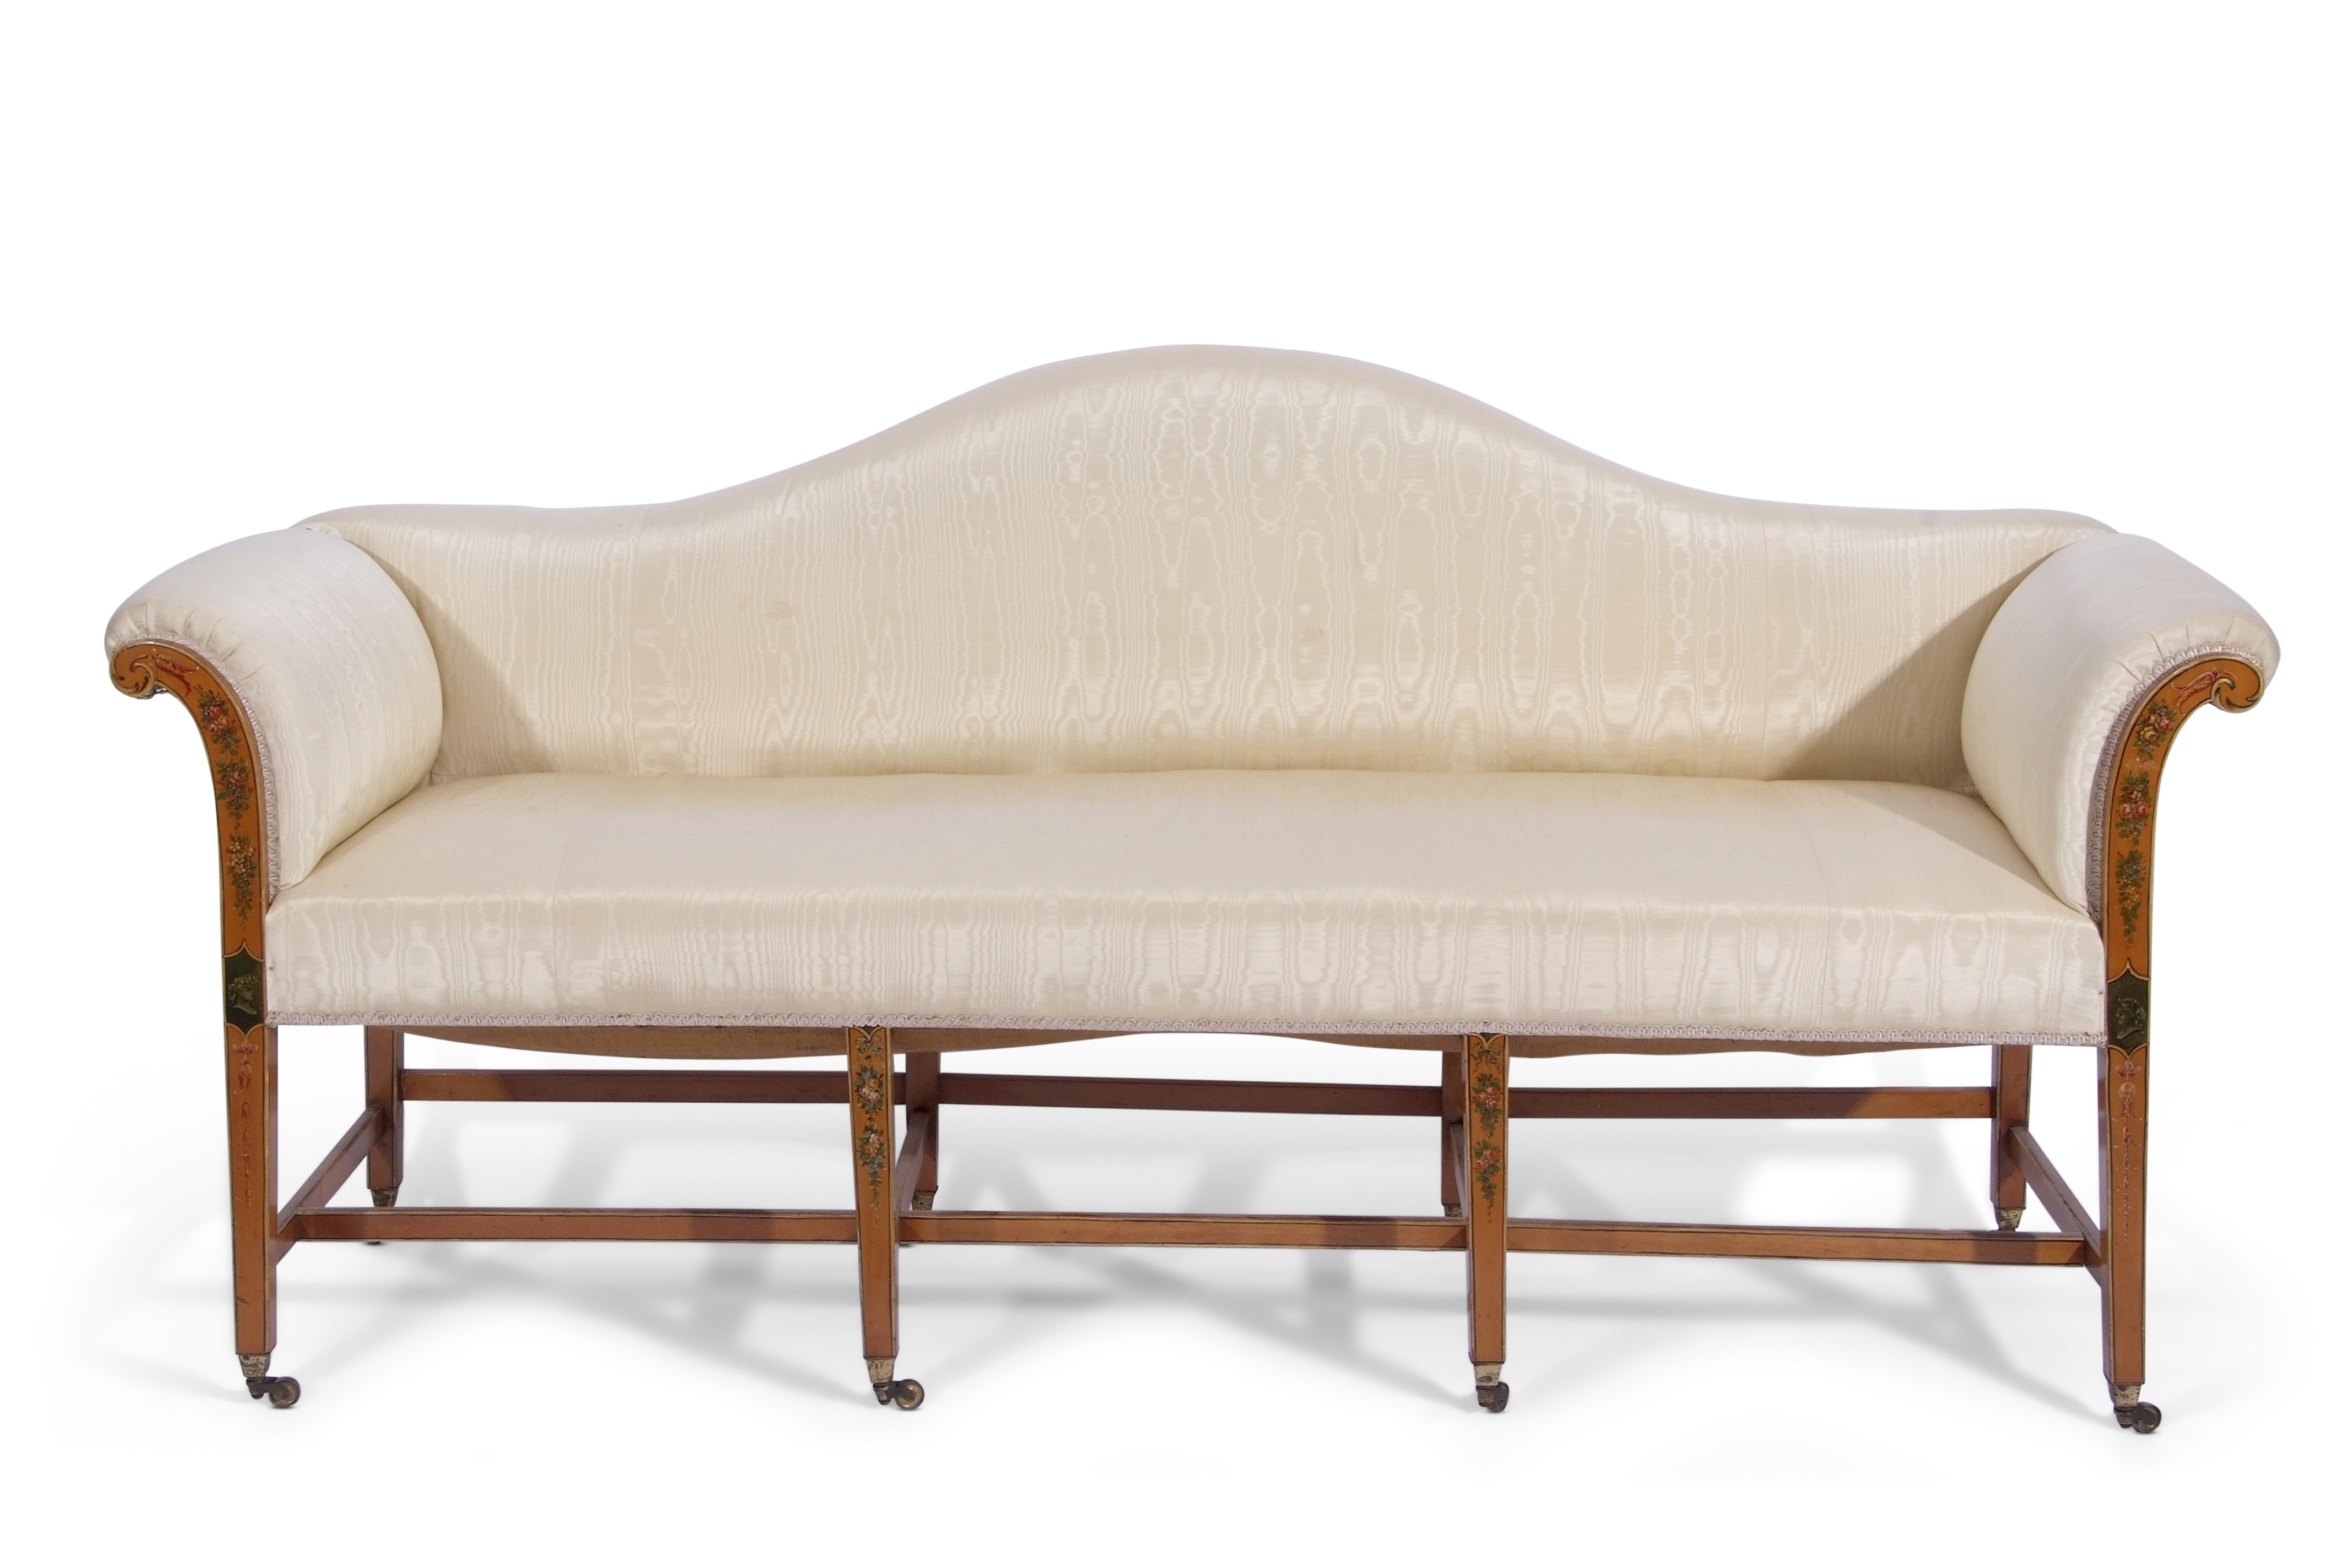 Edwardian Georgian style painted satinwood three-seated hump-back sofa on eight tapering square legs